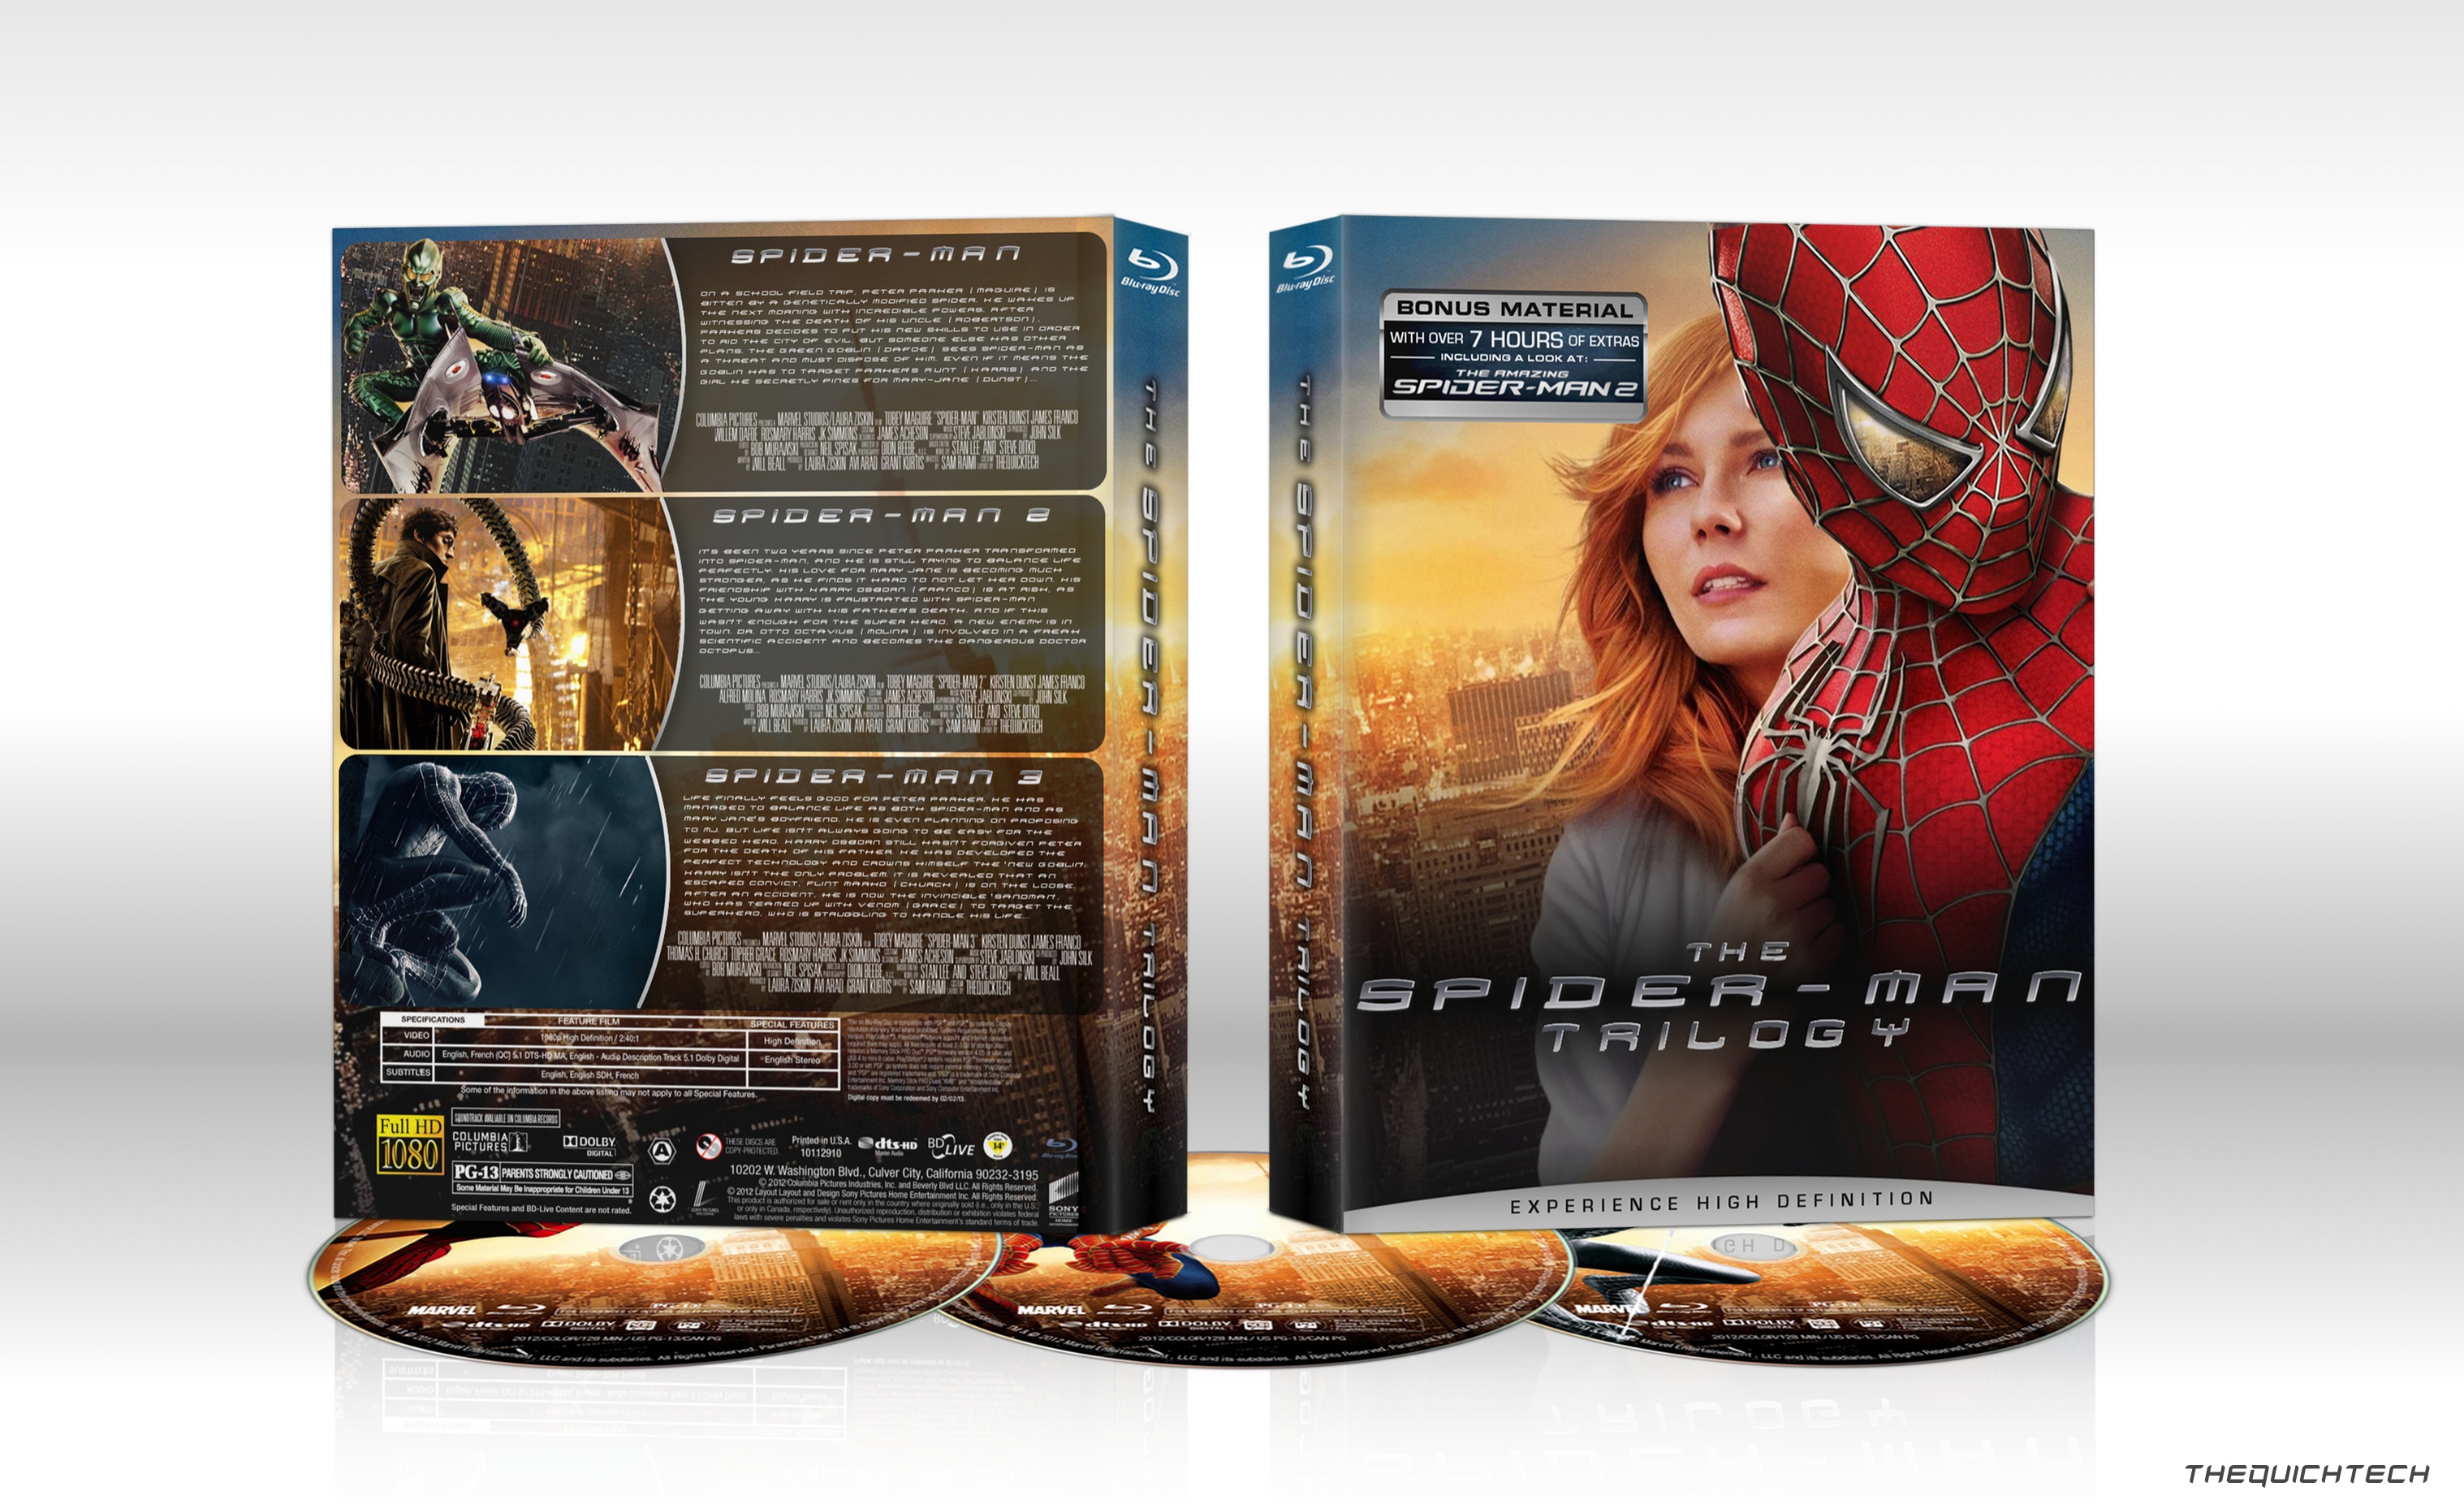 The Spider-Man Trilogy box cover